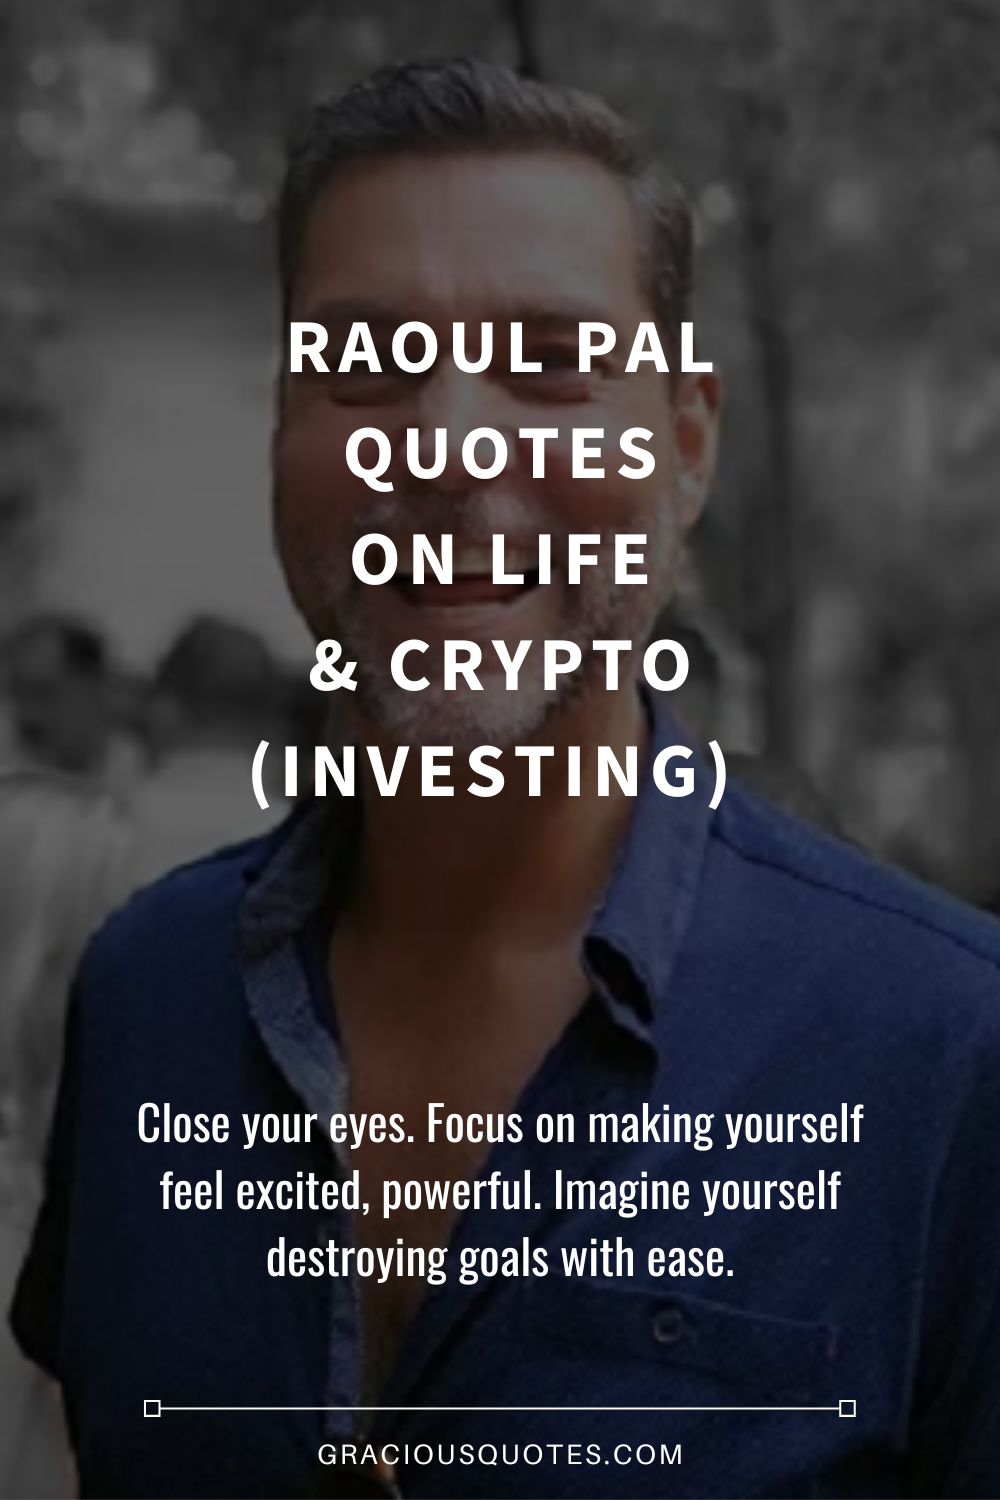 Raoul Pal Quotes on Life & Crypto (INVESTING) - Gracious Quotes